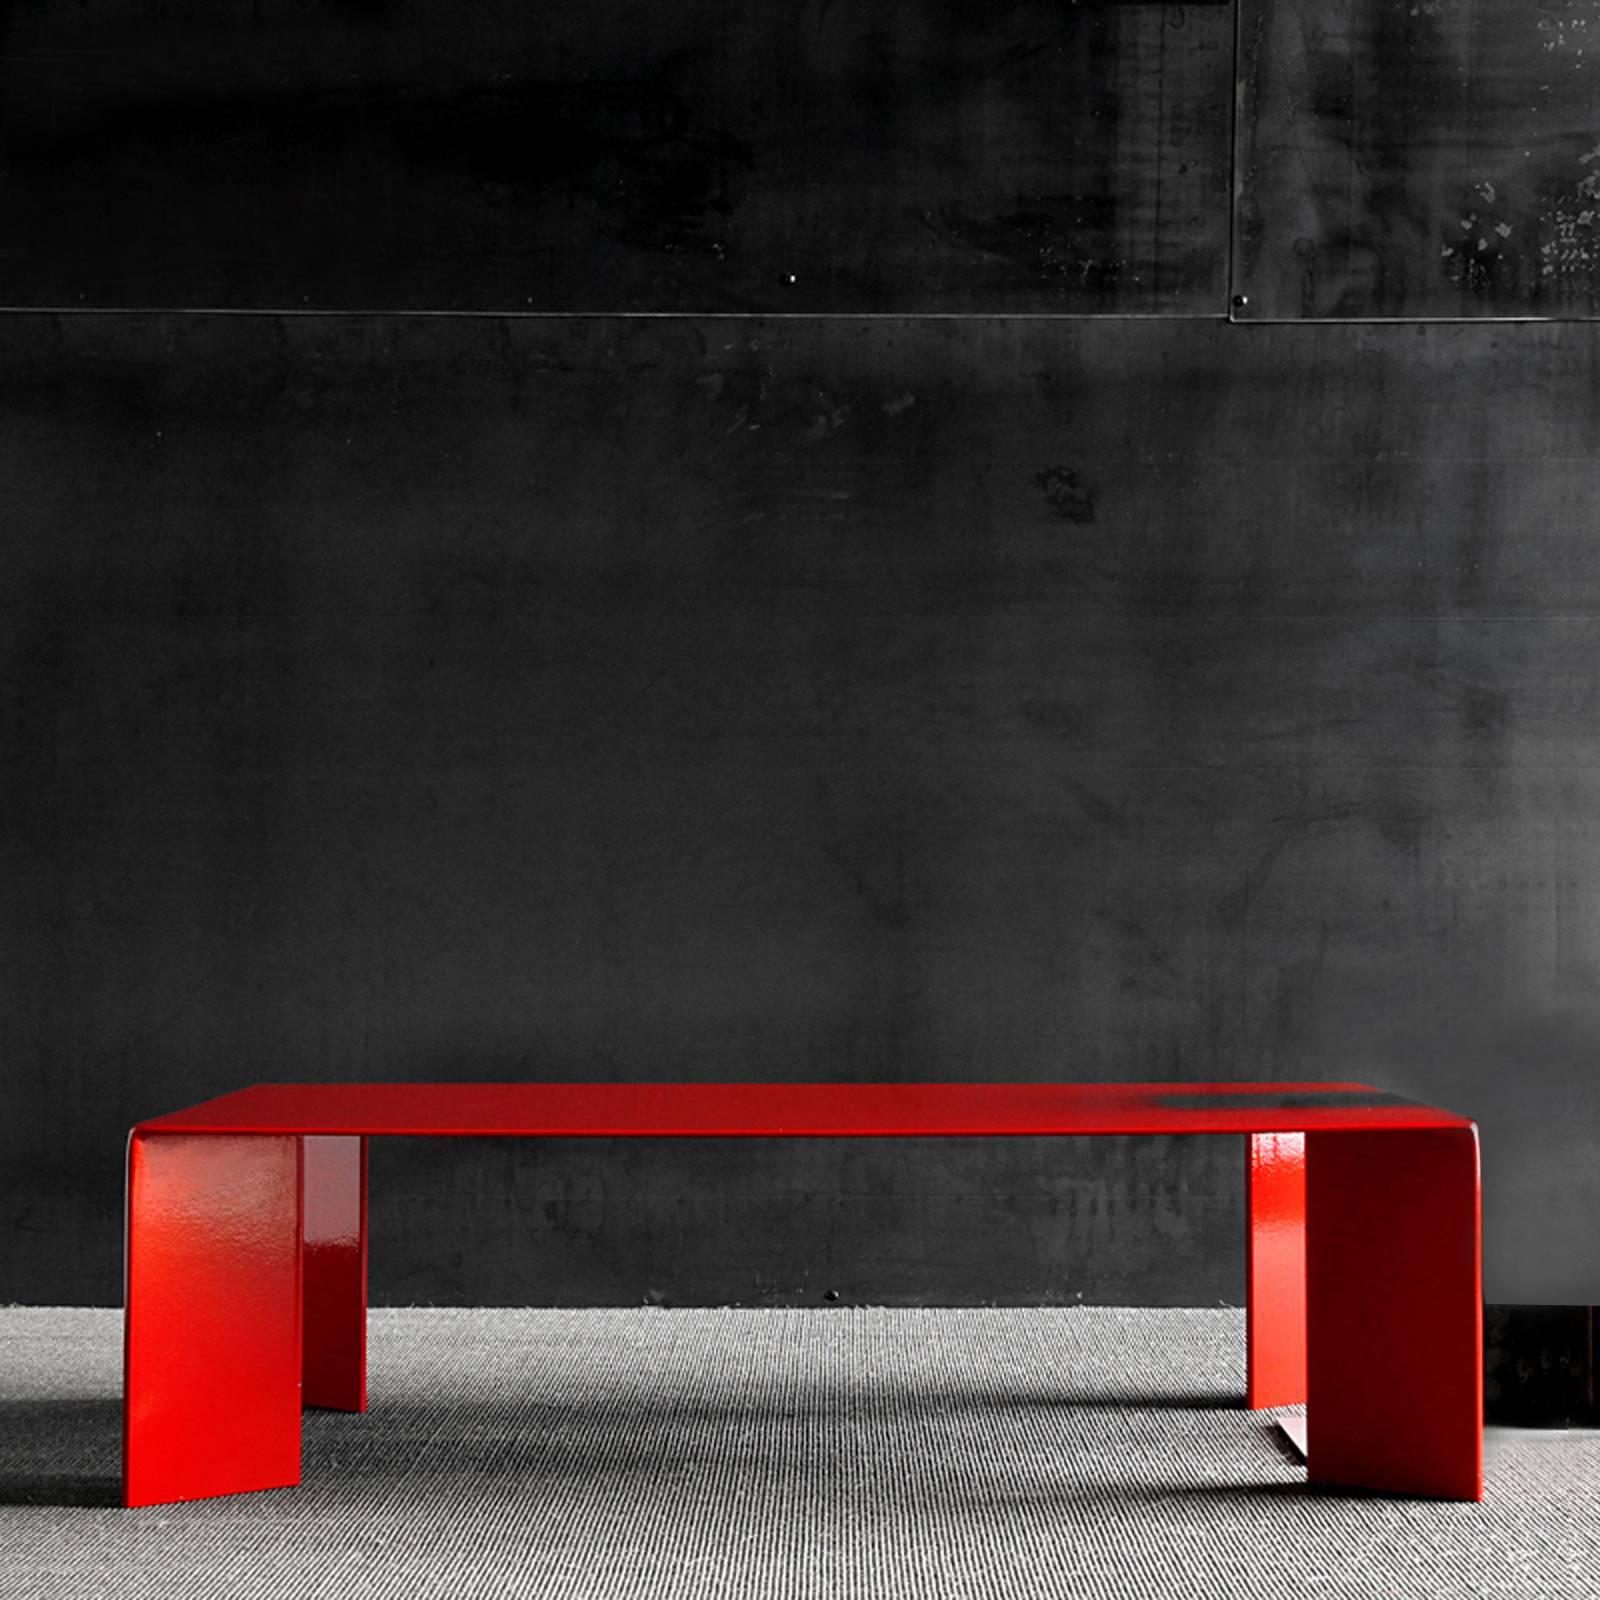 Coffee table Laqué Rouge in steel, French manufacture,
red lacquered, custom made available. Available in dark
finish or other colors, on request.
Available in:
L100xD100xH35cm, price: € 4,200.00.
L125xD80xH35cm, price: € 4,200.00.
L125xD100xH35cm,